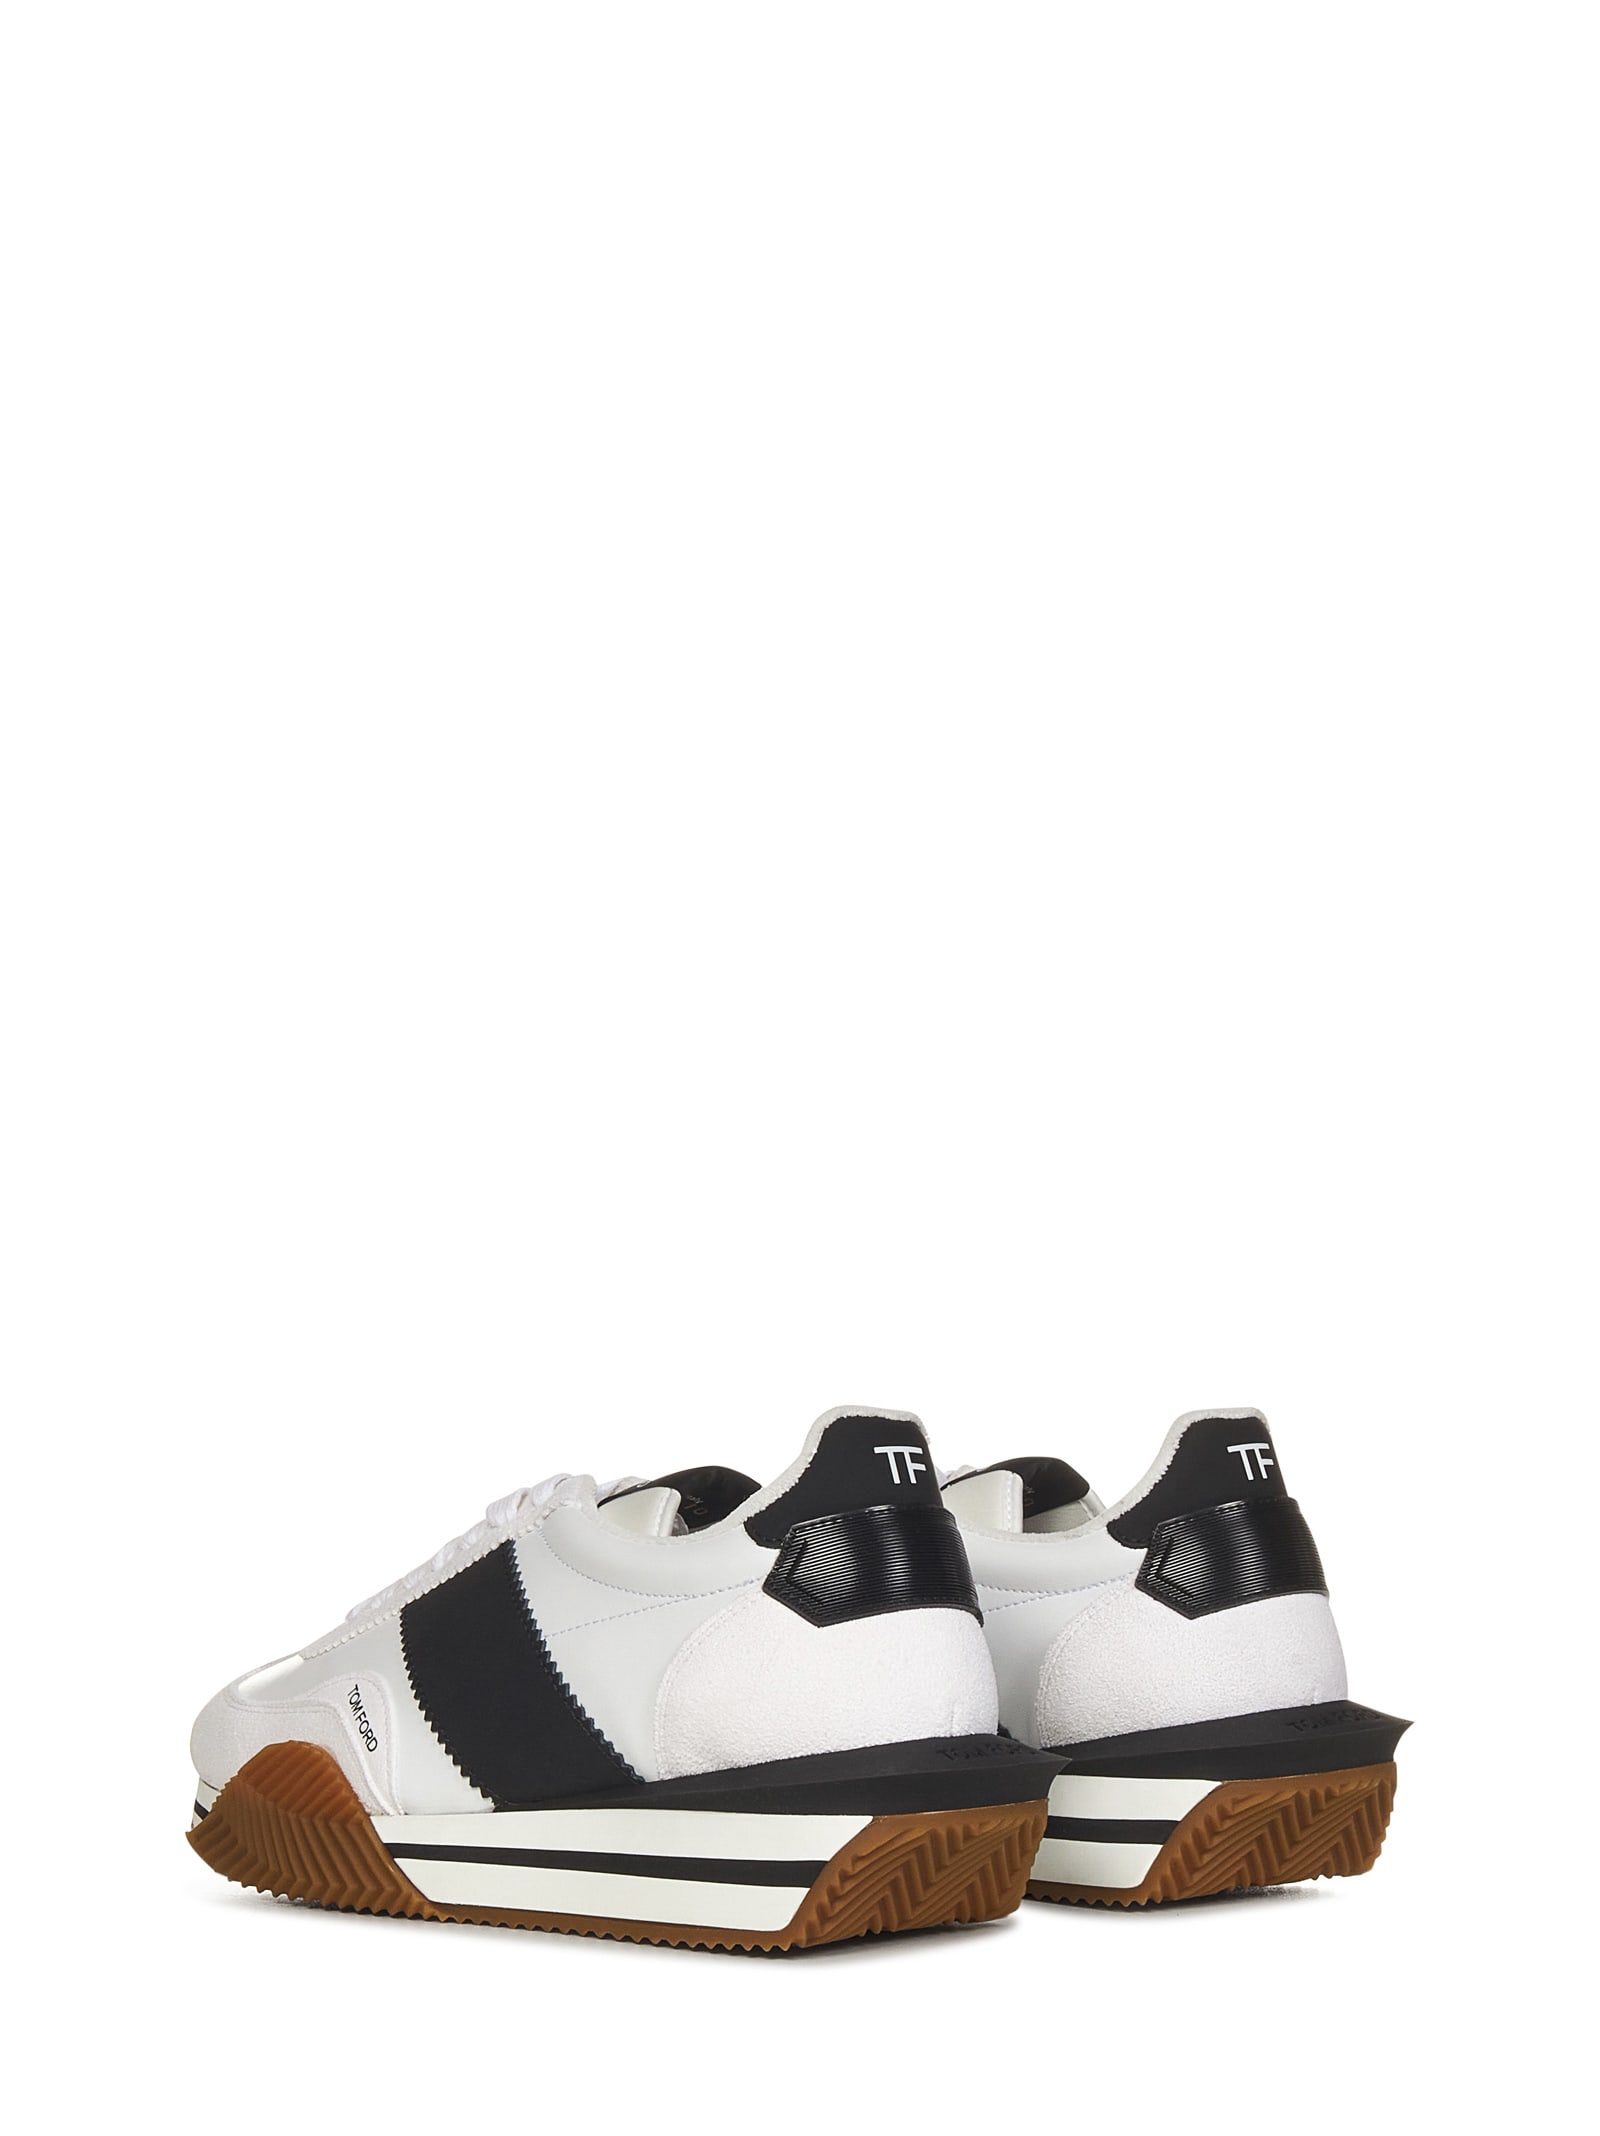 Shop Tom Ford James Sneakers In White